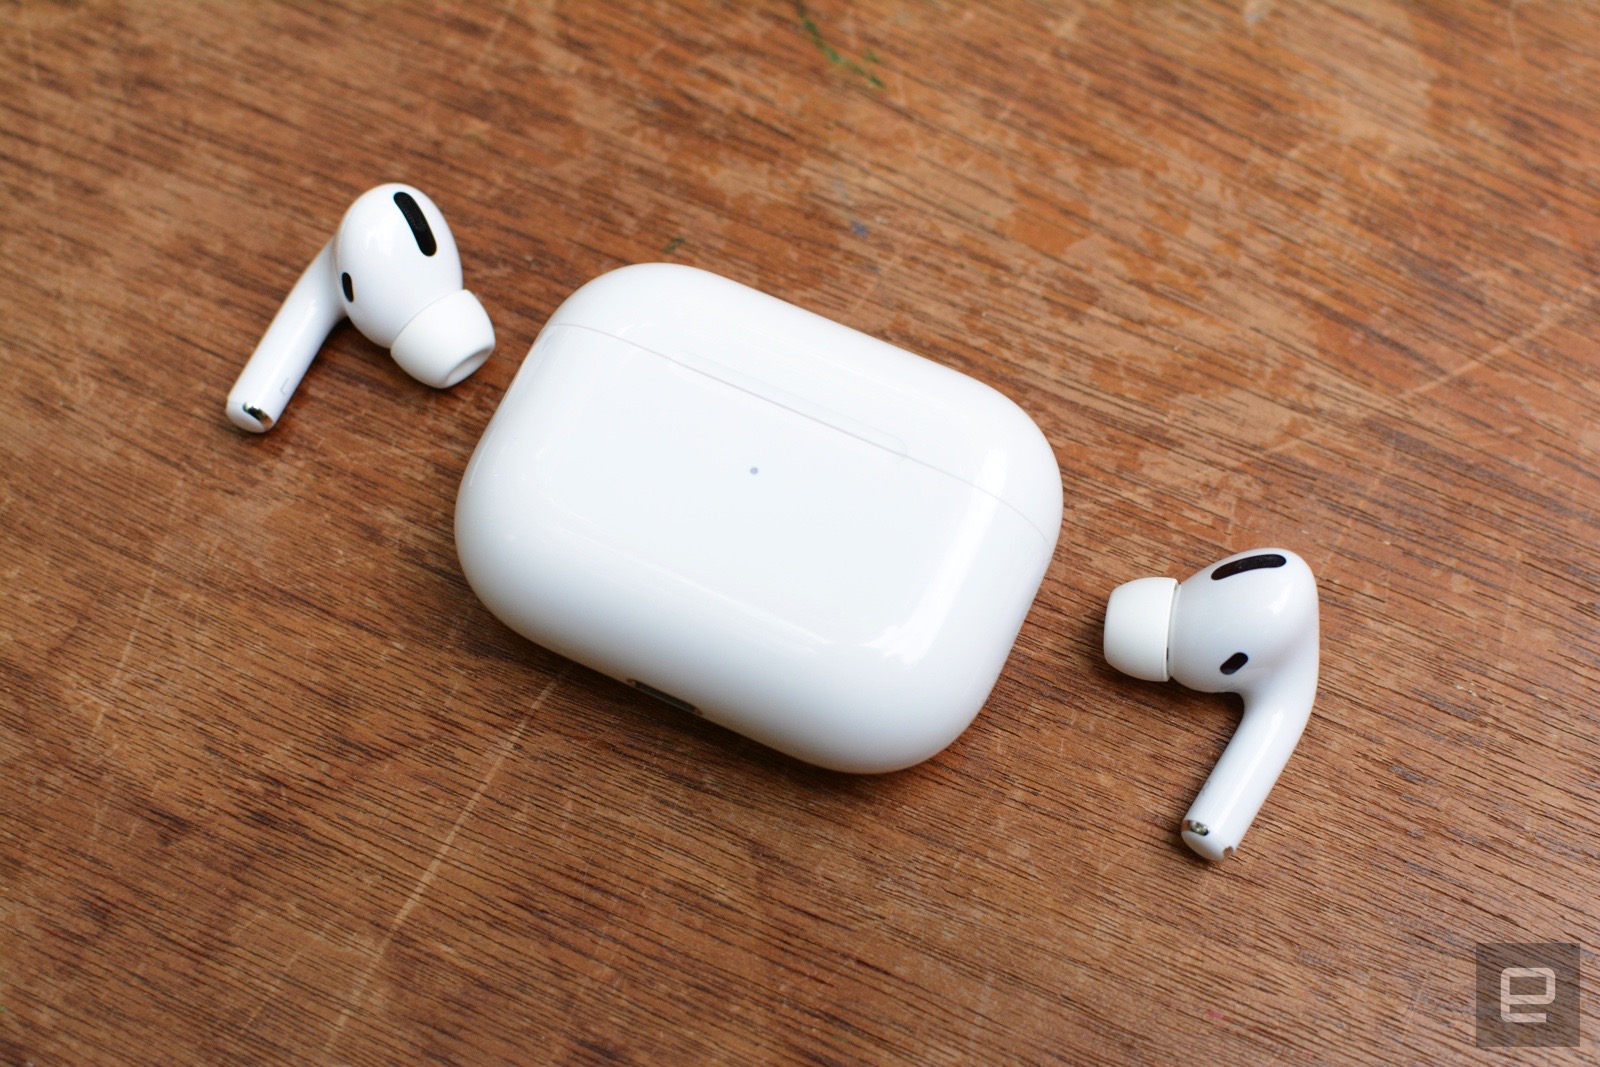 Apple extends repair program for crackling AirPods Professional buds for an additional year